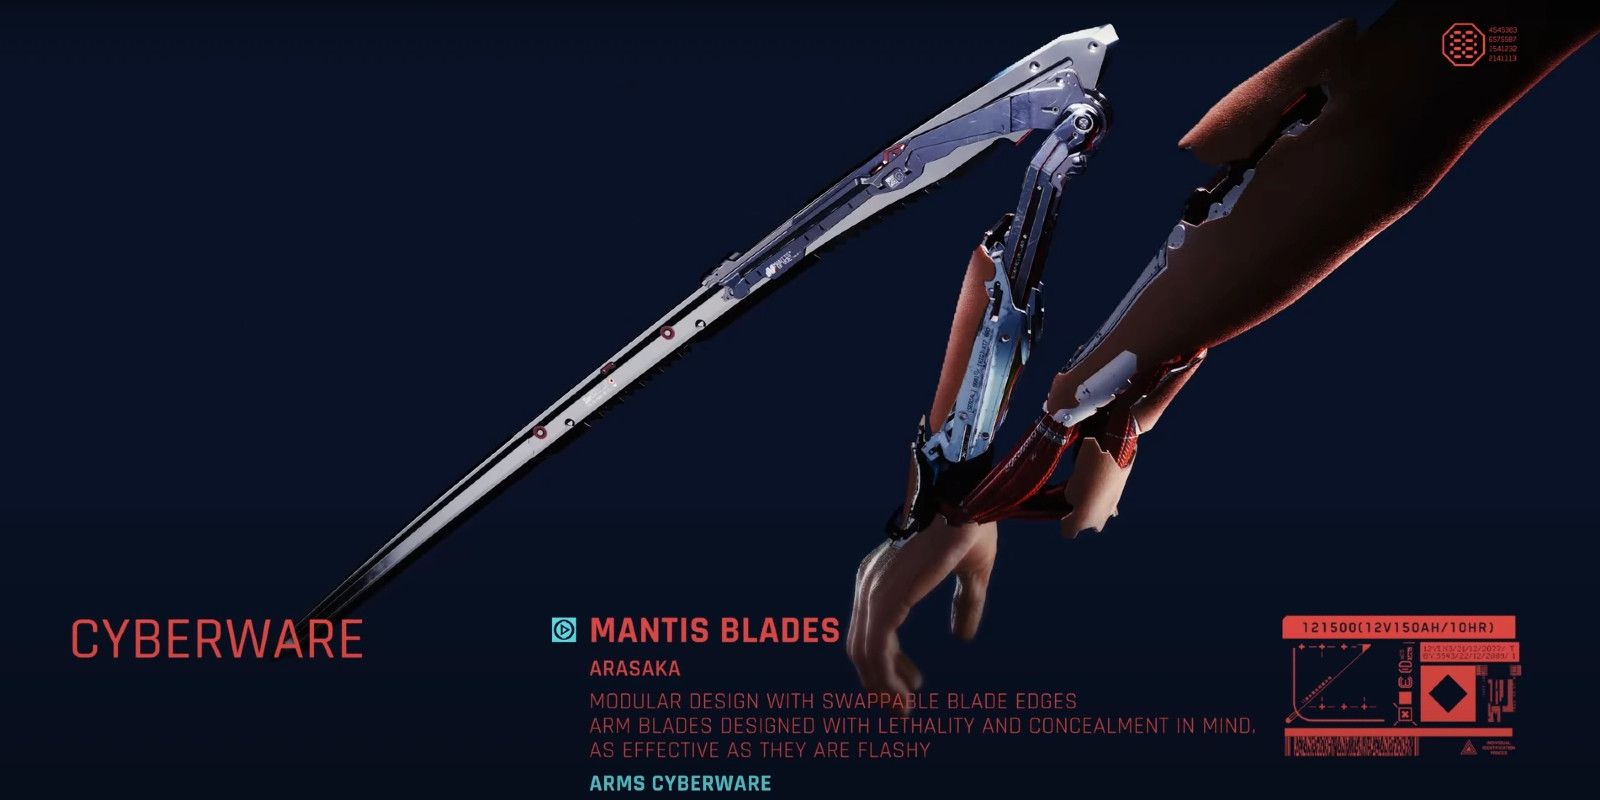 Informative screen for the Mantis Blades cyberware in Cyberpunk 2077. Manufactured by Arasaka, the Mantis Blades description reads, 